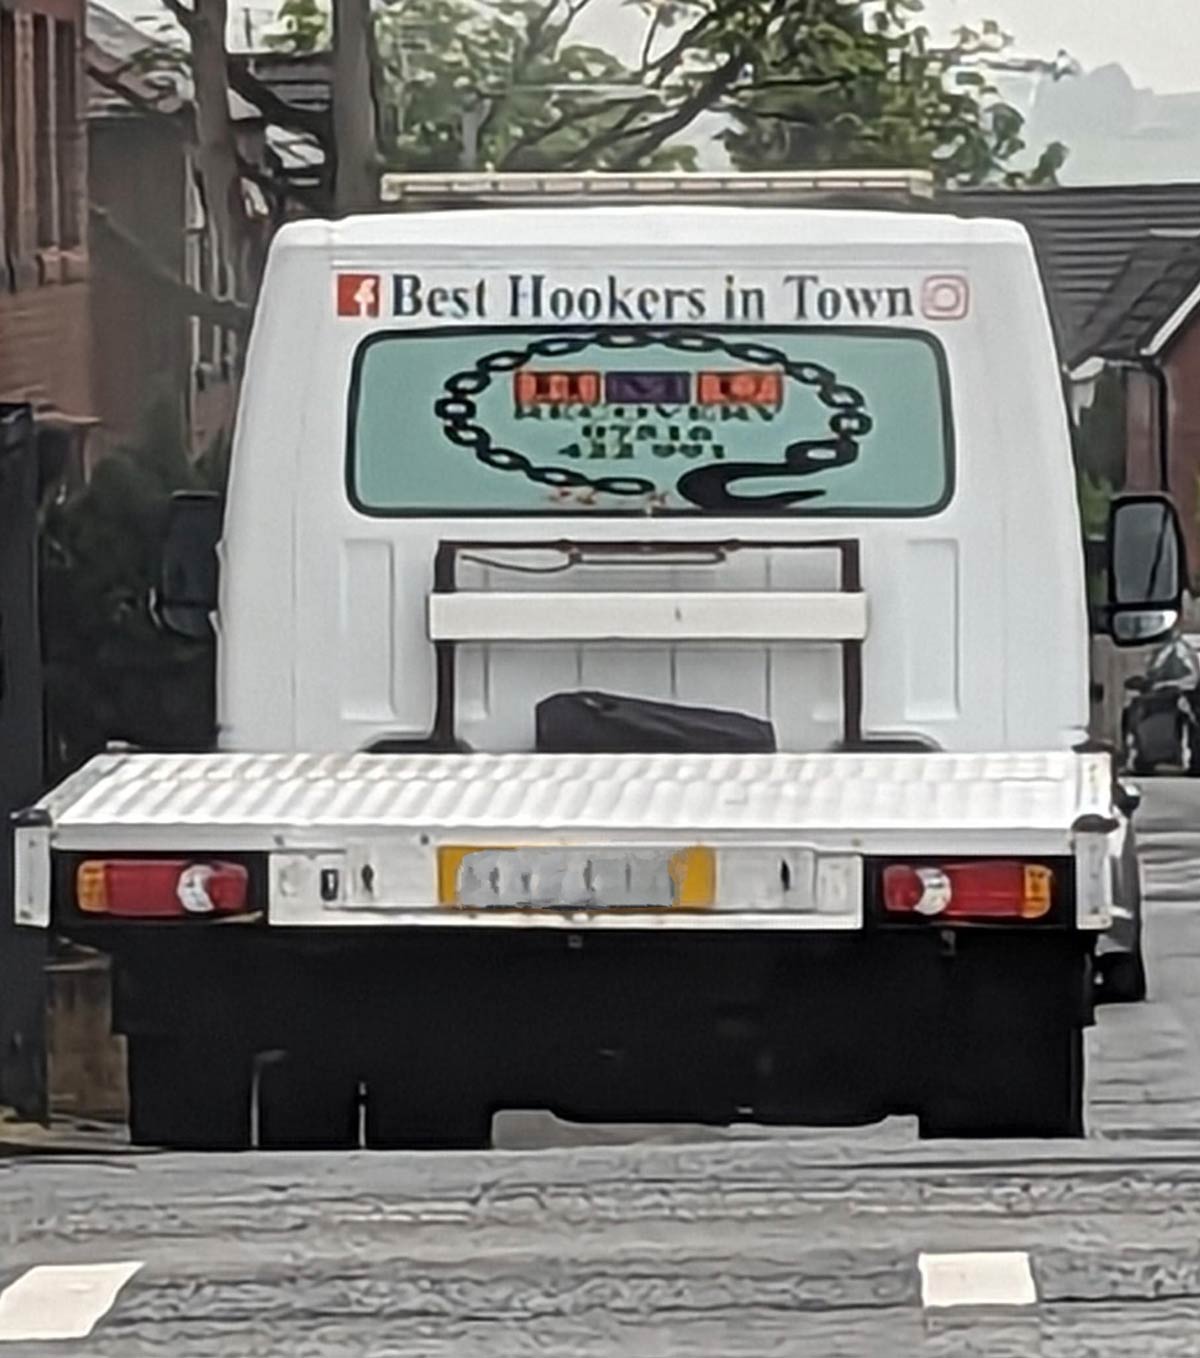 This tow truck